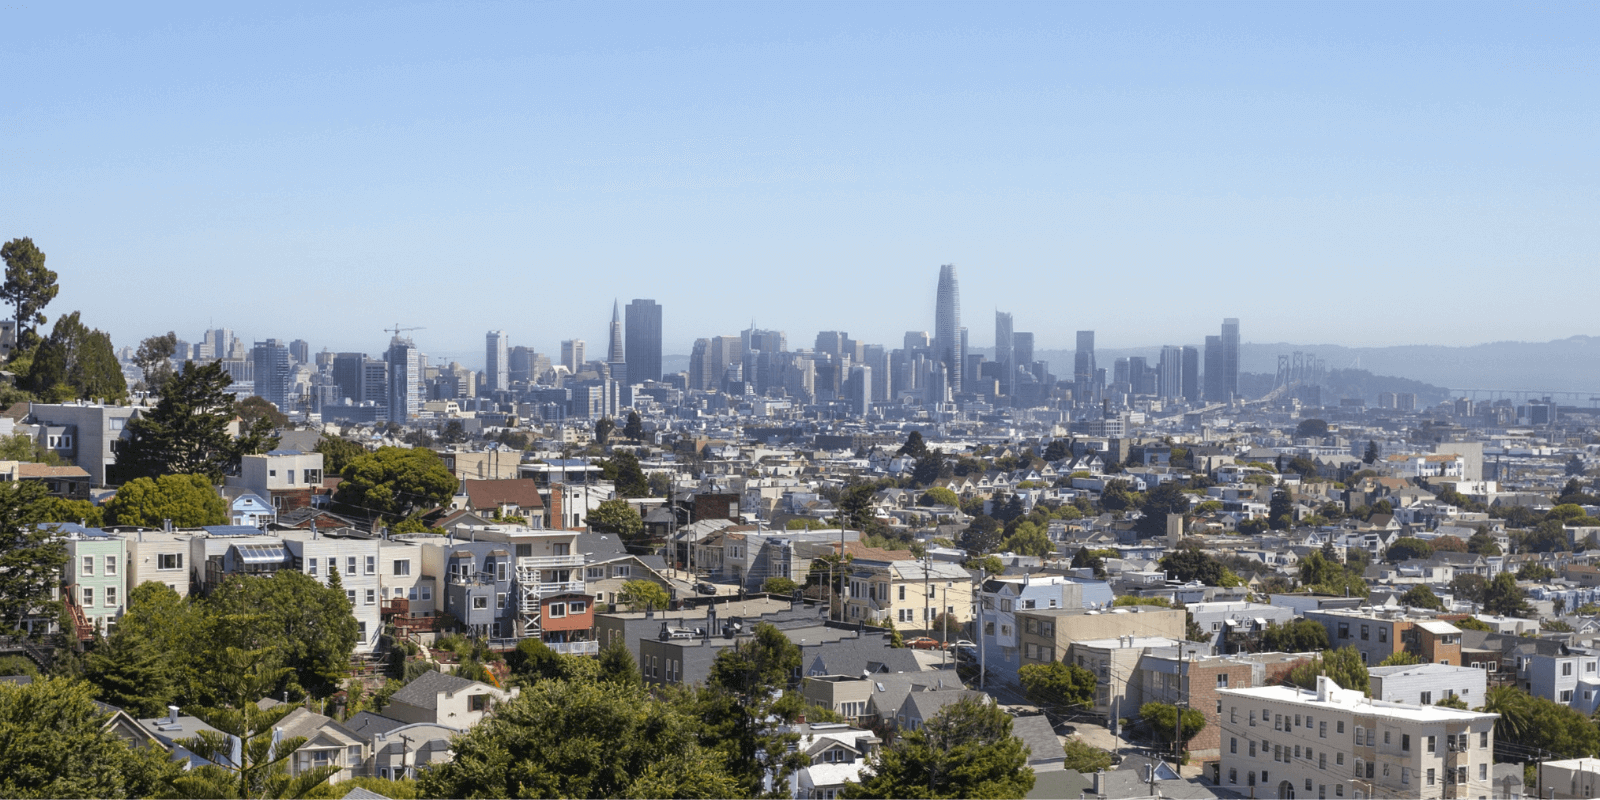 Image of City of San Francisco and nearby homes